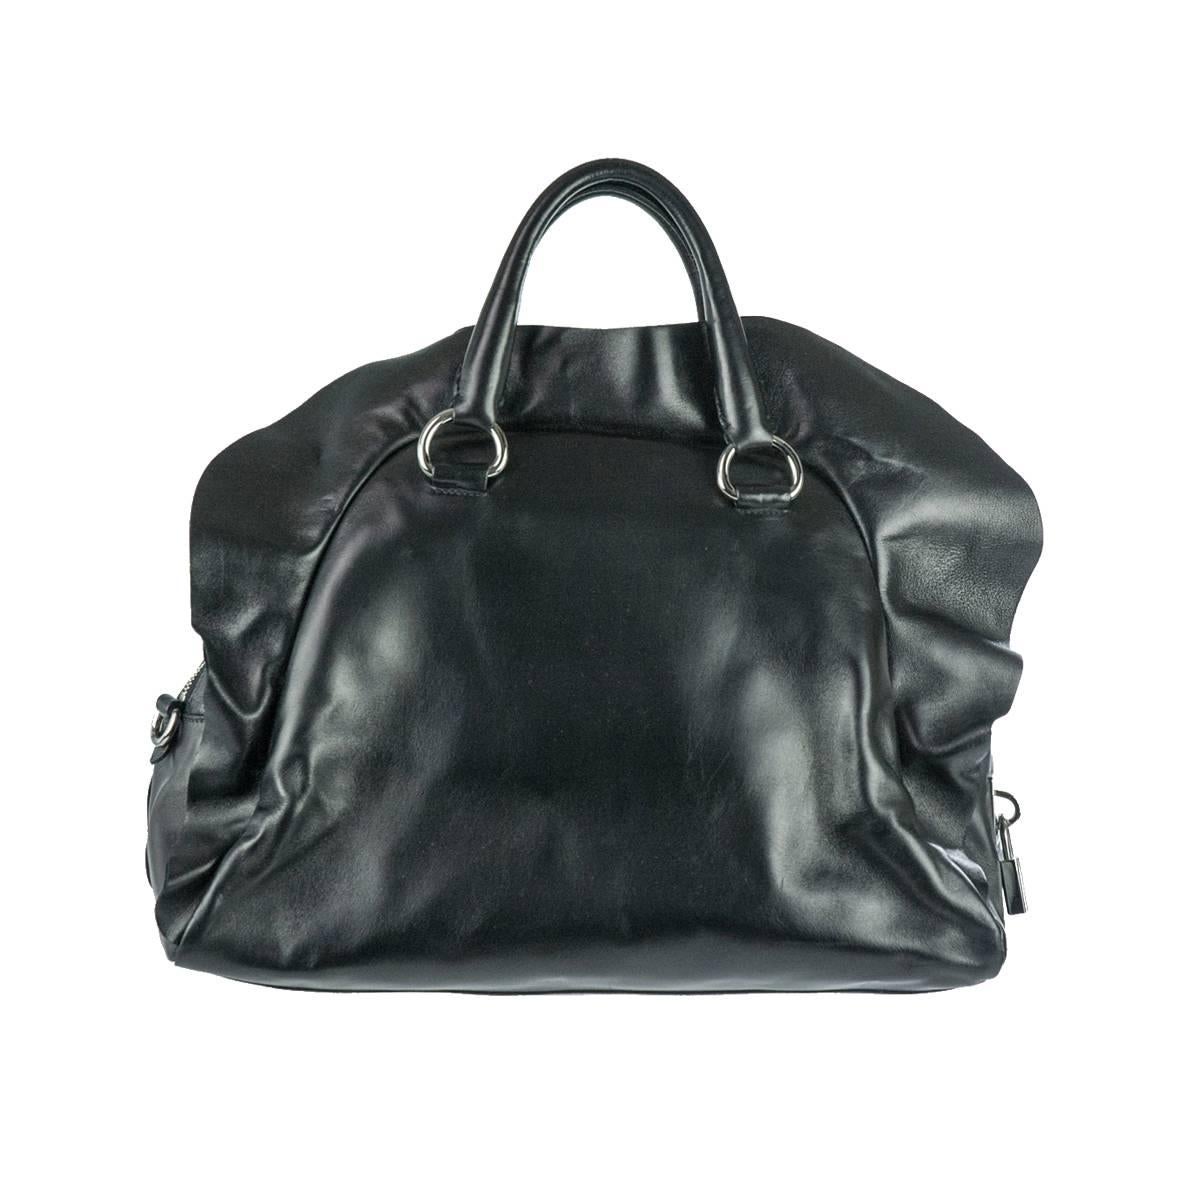 Fantastic Prada bowler bag
2008 Collection
Black leather
With leather rouches
Zip closure
Double inside pocket
Cm 42 x 30 x 15 (16.5 x 11.8 x 5.9 inches)
Original price € 1250
Made in Italy
Worldwide express shipping included in the price